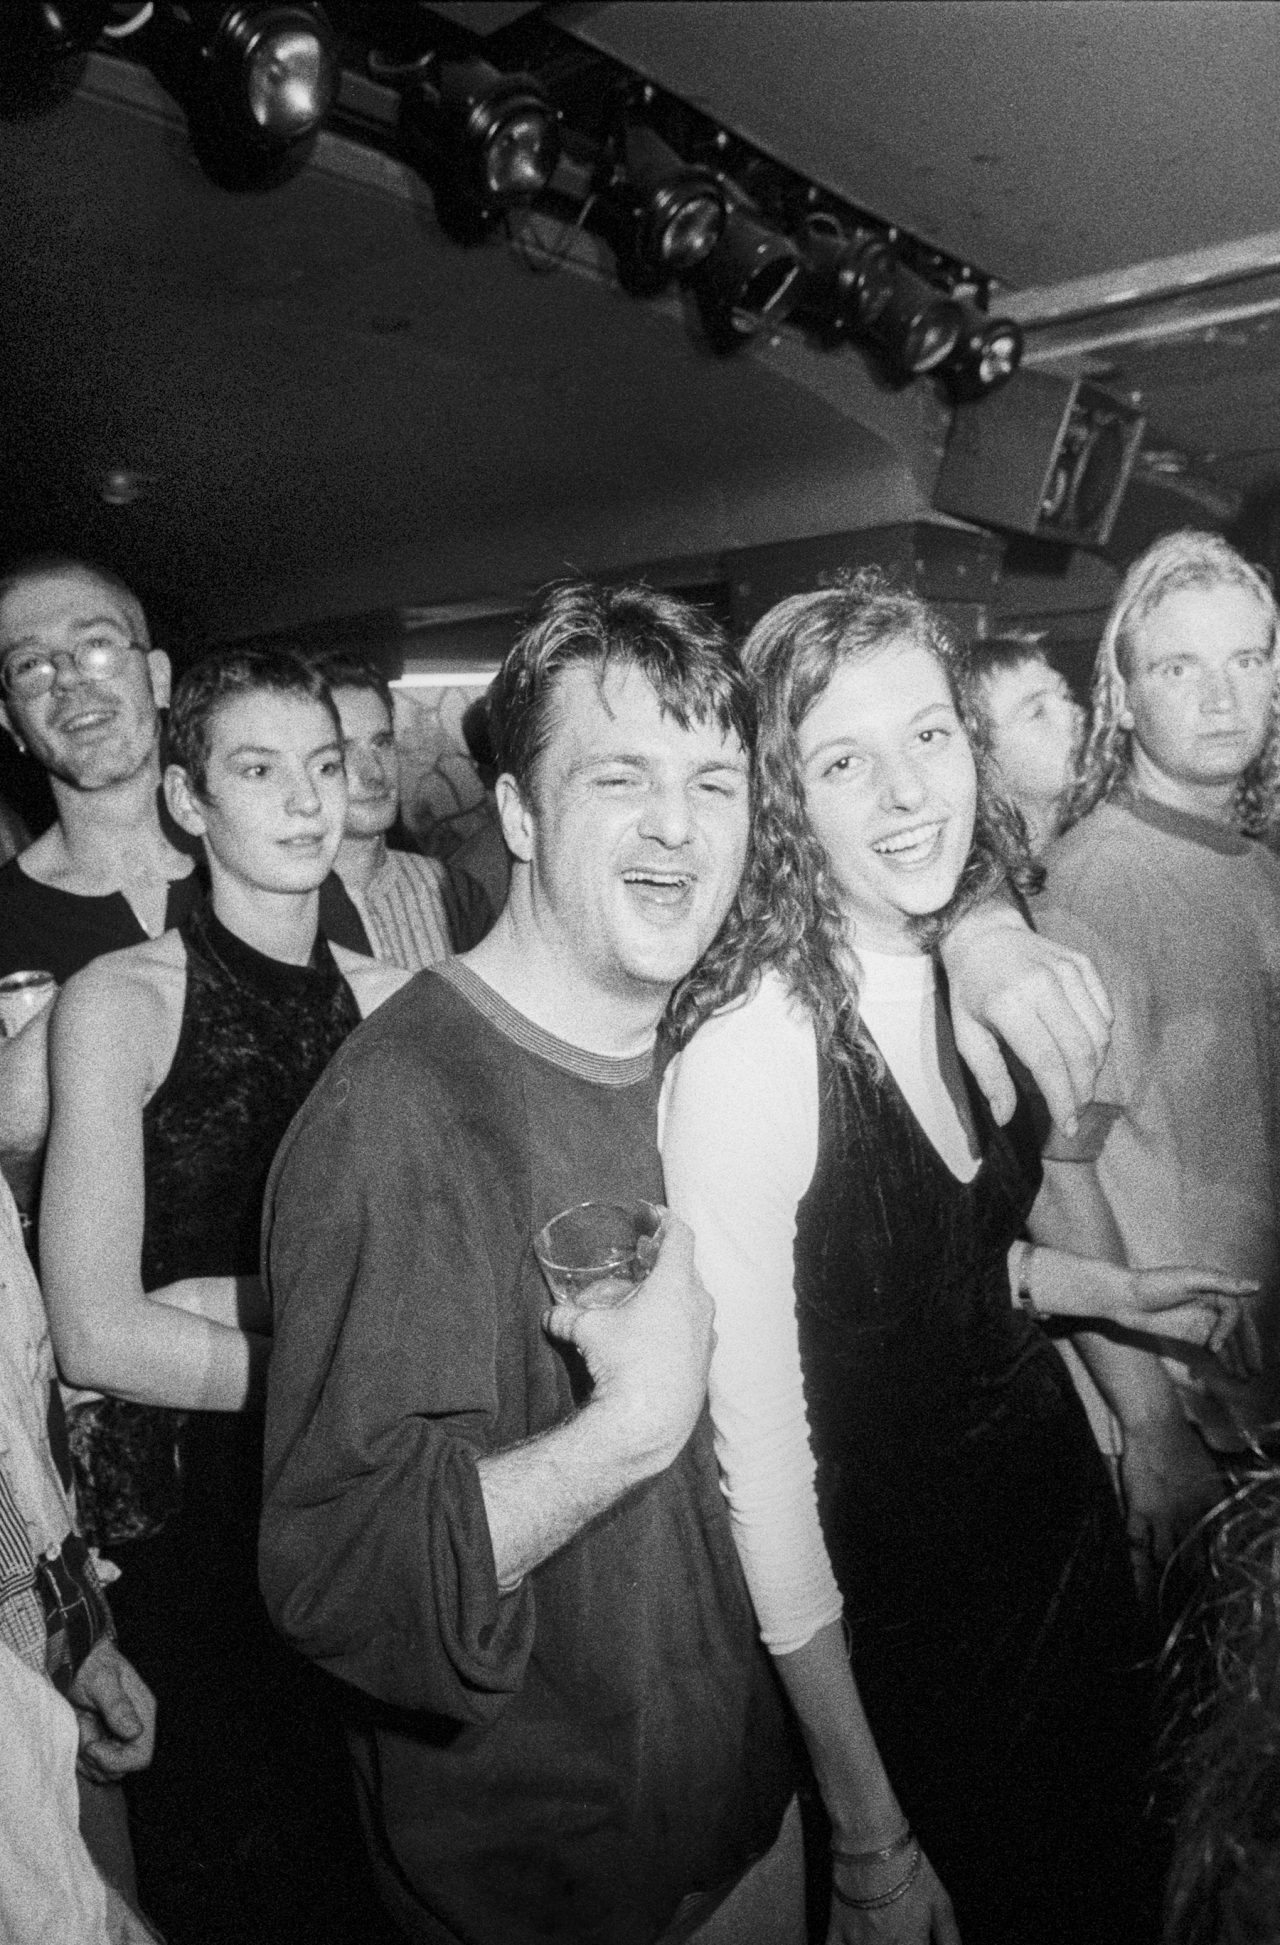 A Night in Atlantis: Nick Peacock’s Photographs of Clubbing in 1990